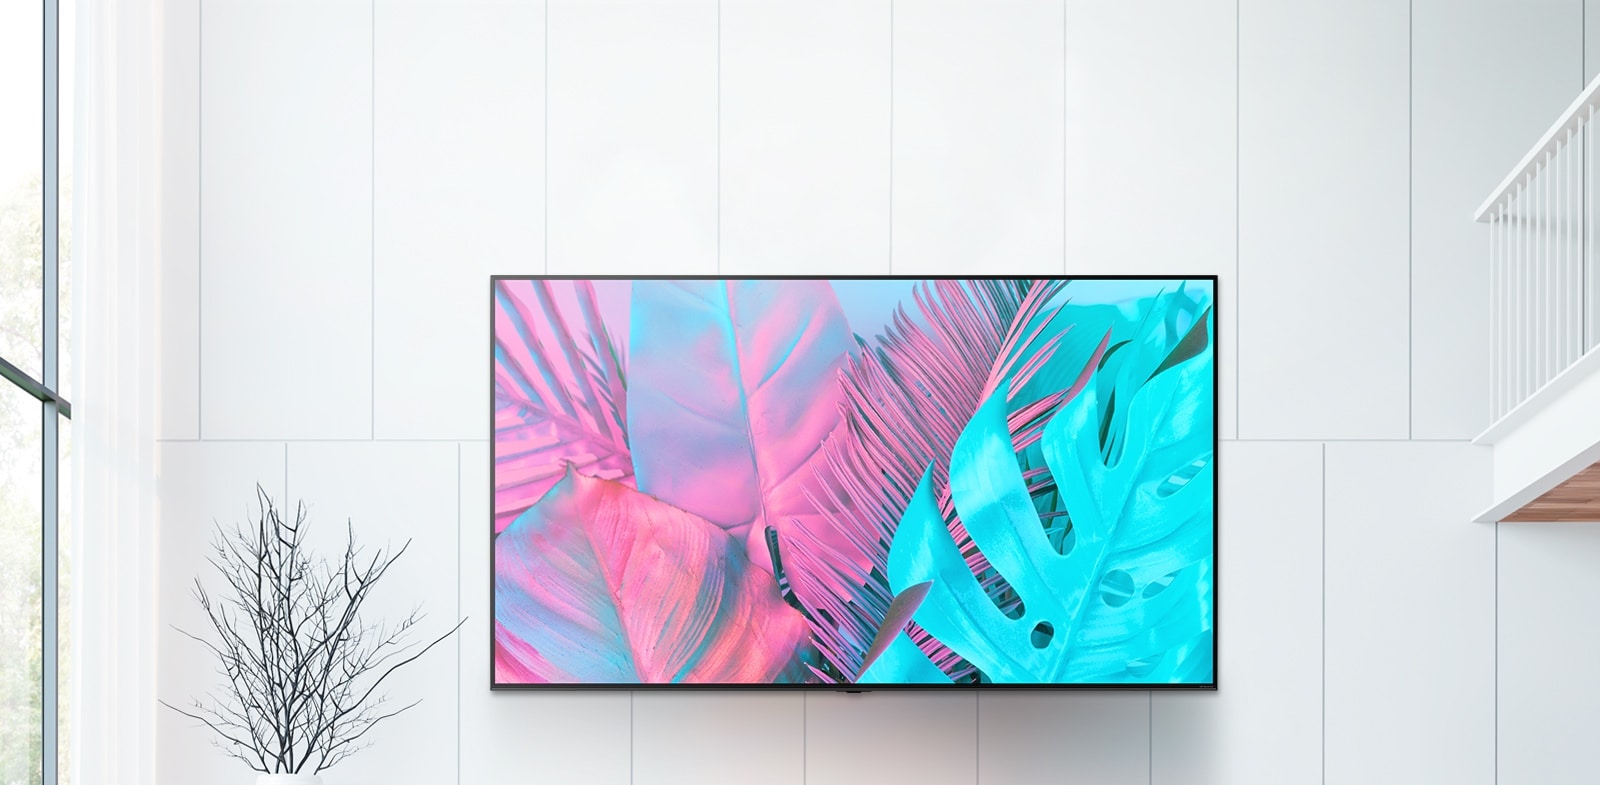 A large flatscreen TV mounted against a white wall. The screen shows large leaves in bright colors.